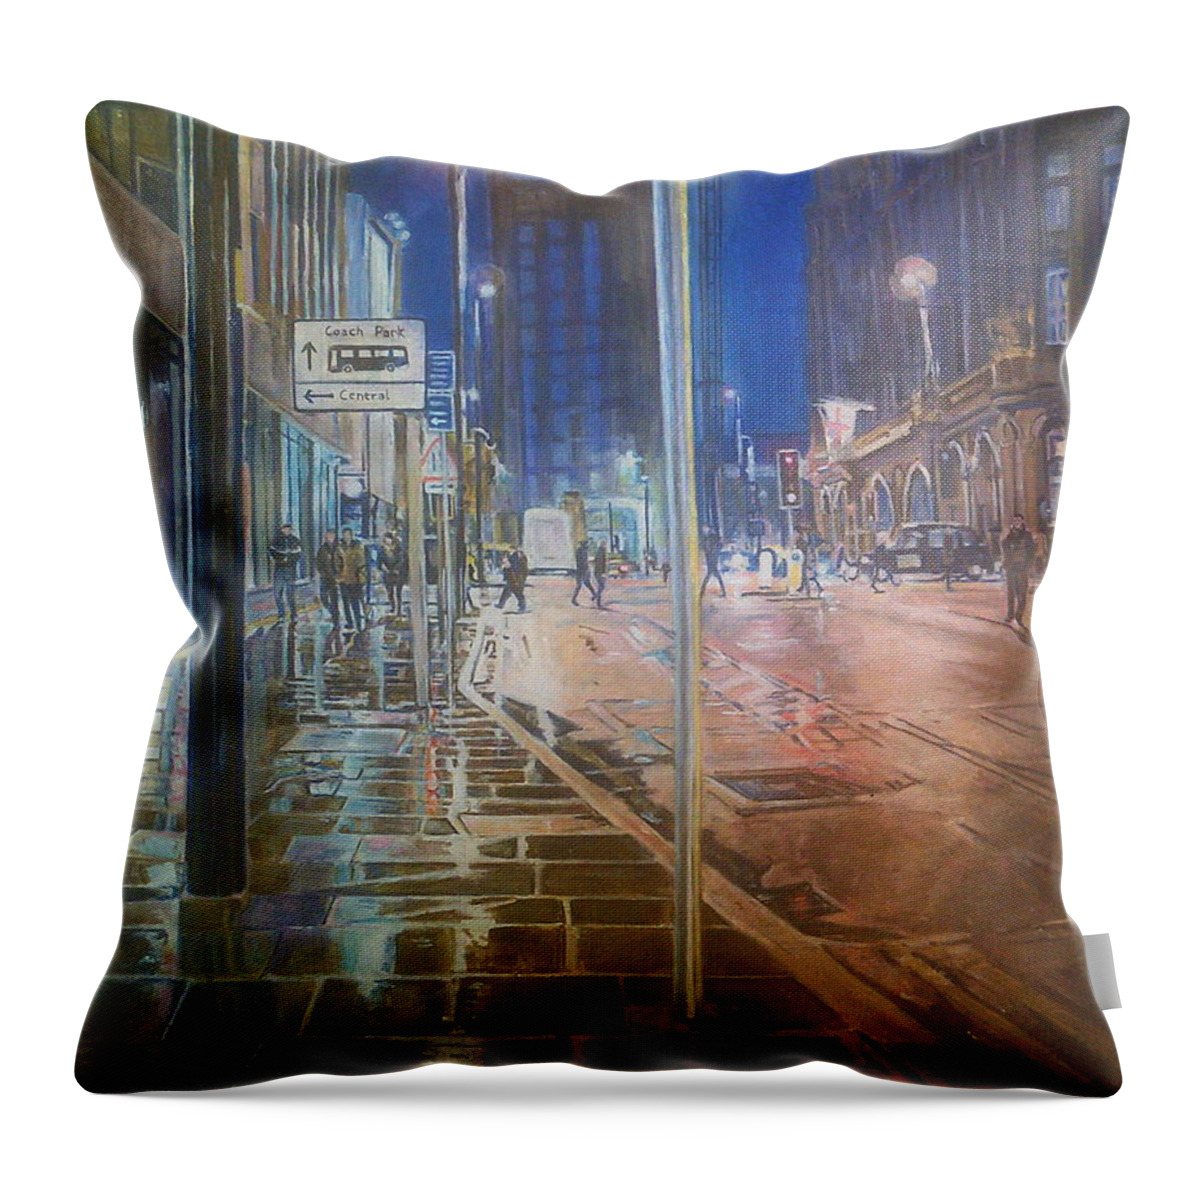 Manchester Night Wet Pavements Light Reflections Buildings People Throw Pillow featuring the painting Manchester At Night by Rosanne Gartner